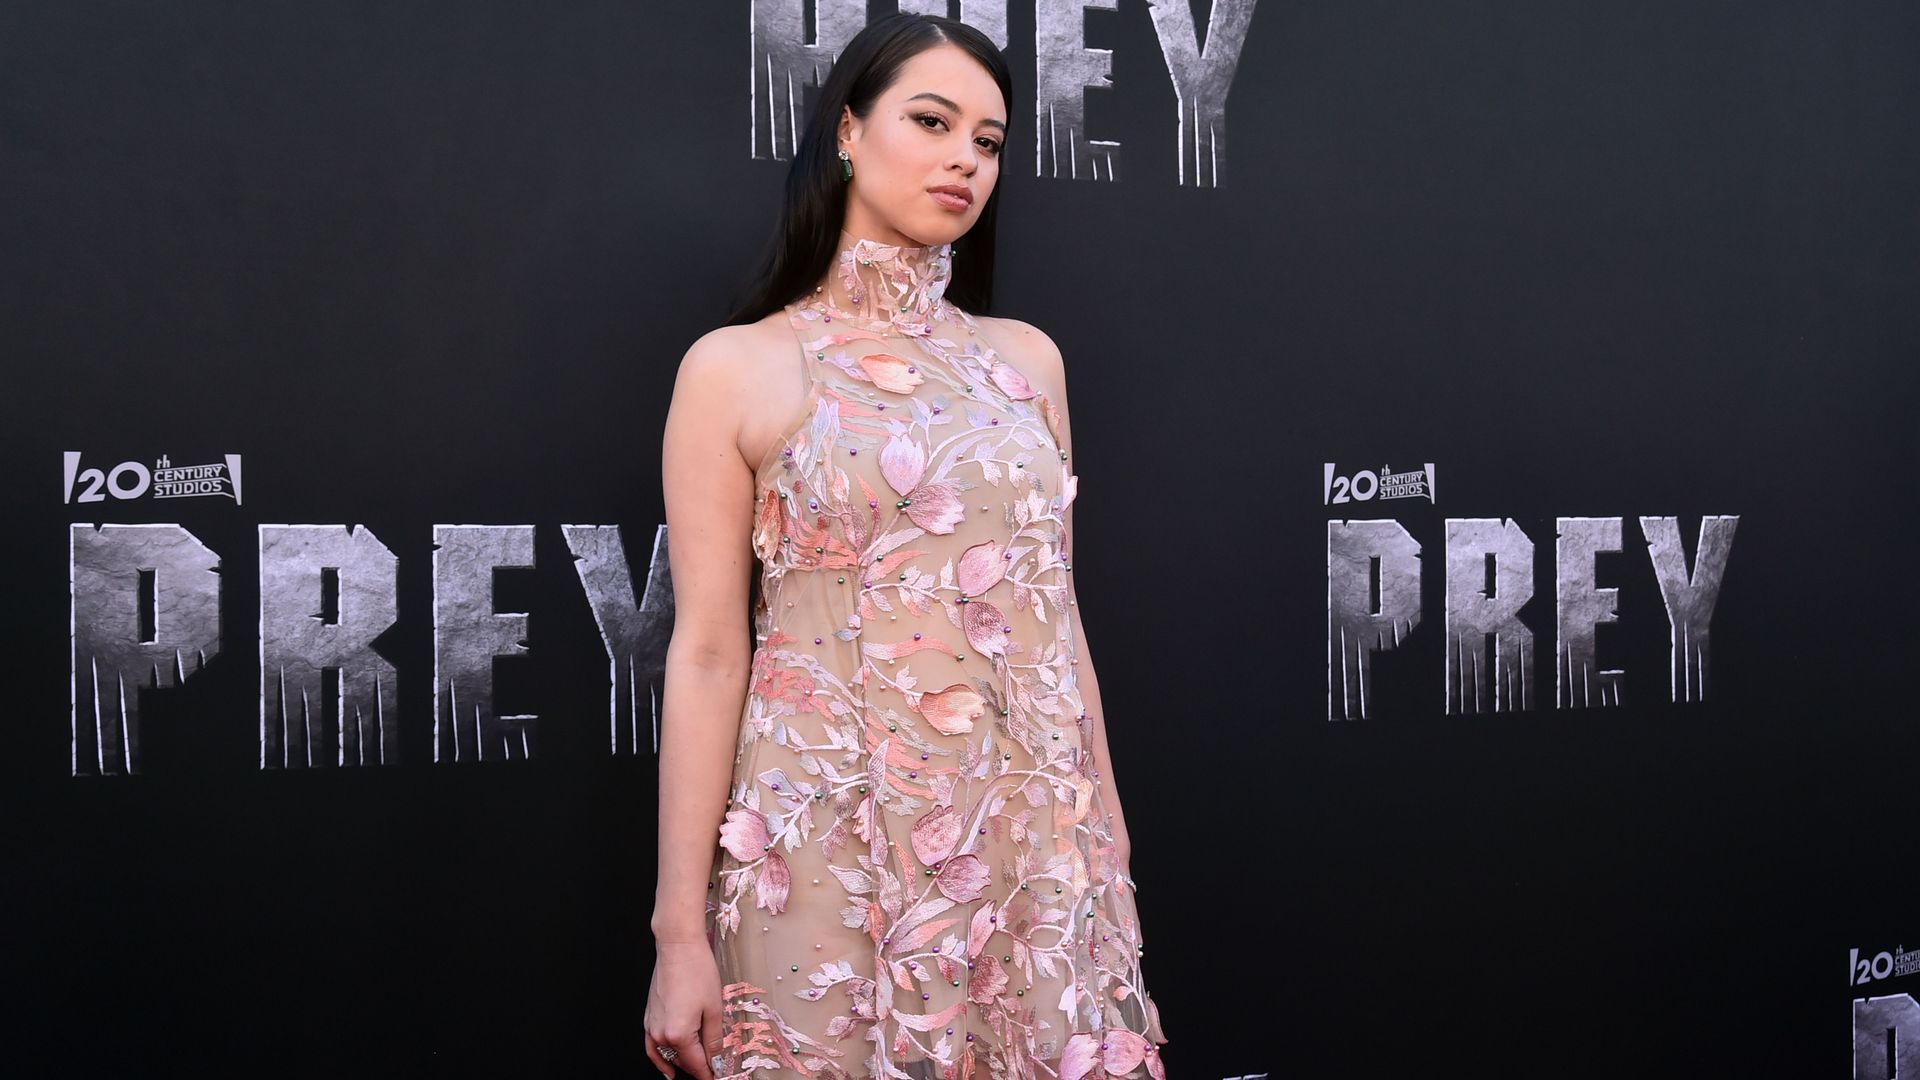 woman in a pink dress with flowers on it in front of a screen printed with Prey and 20th century fox